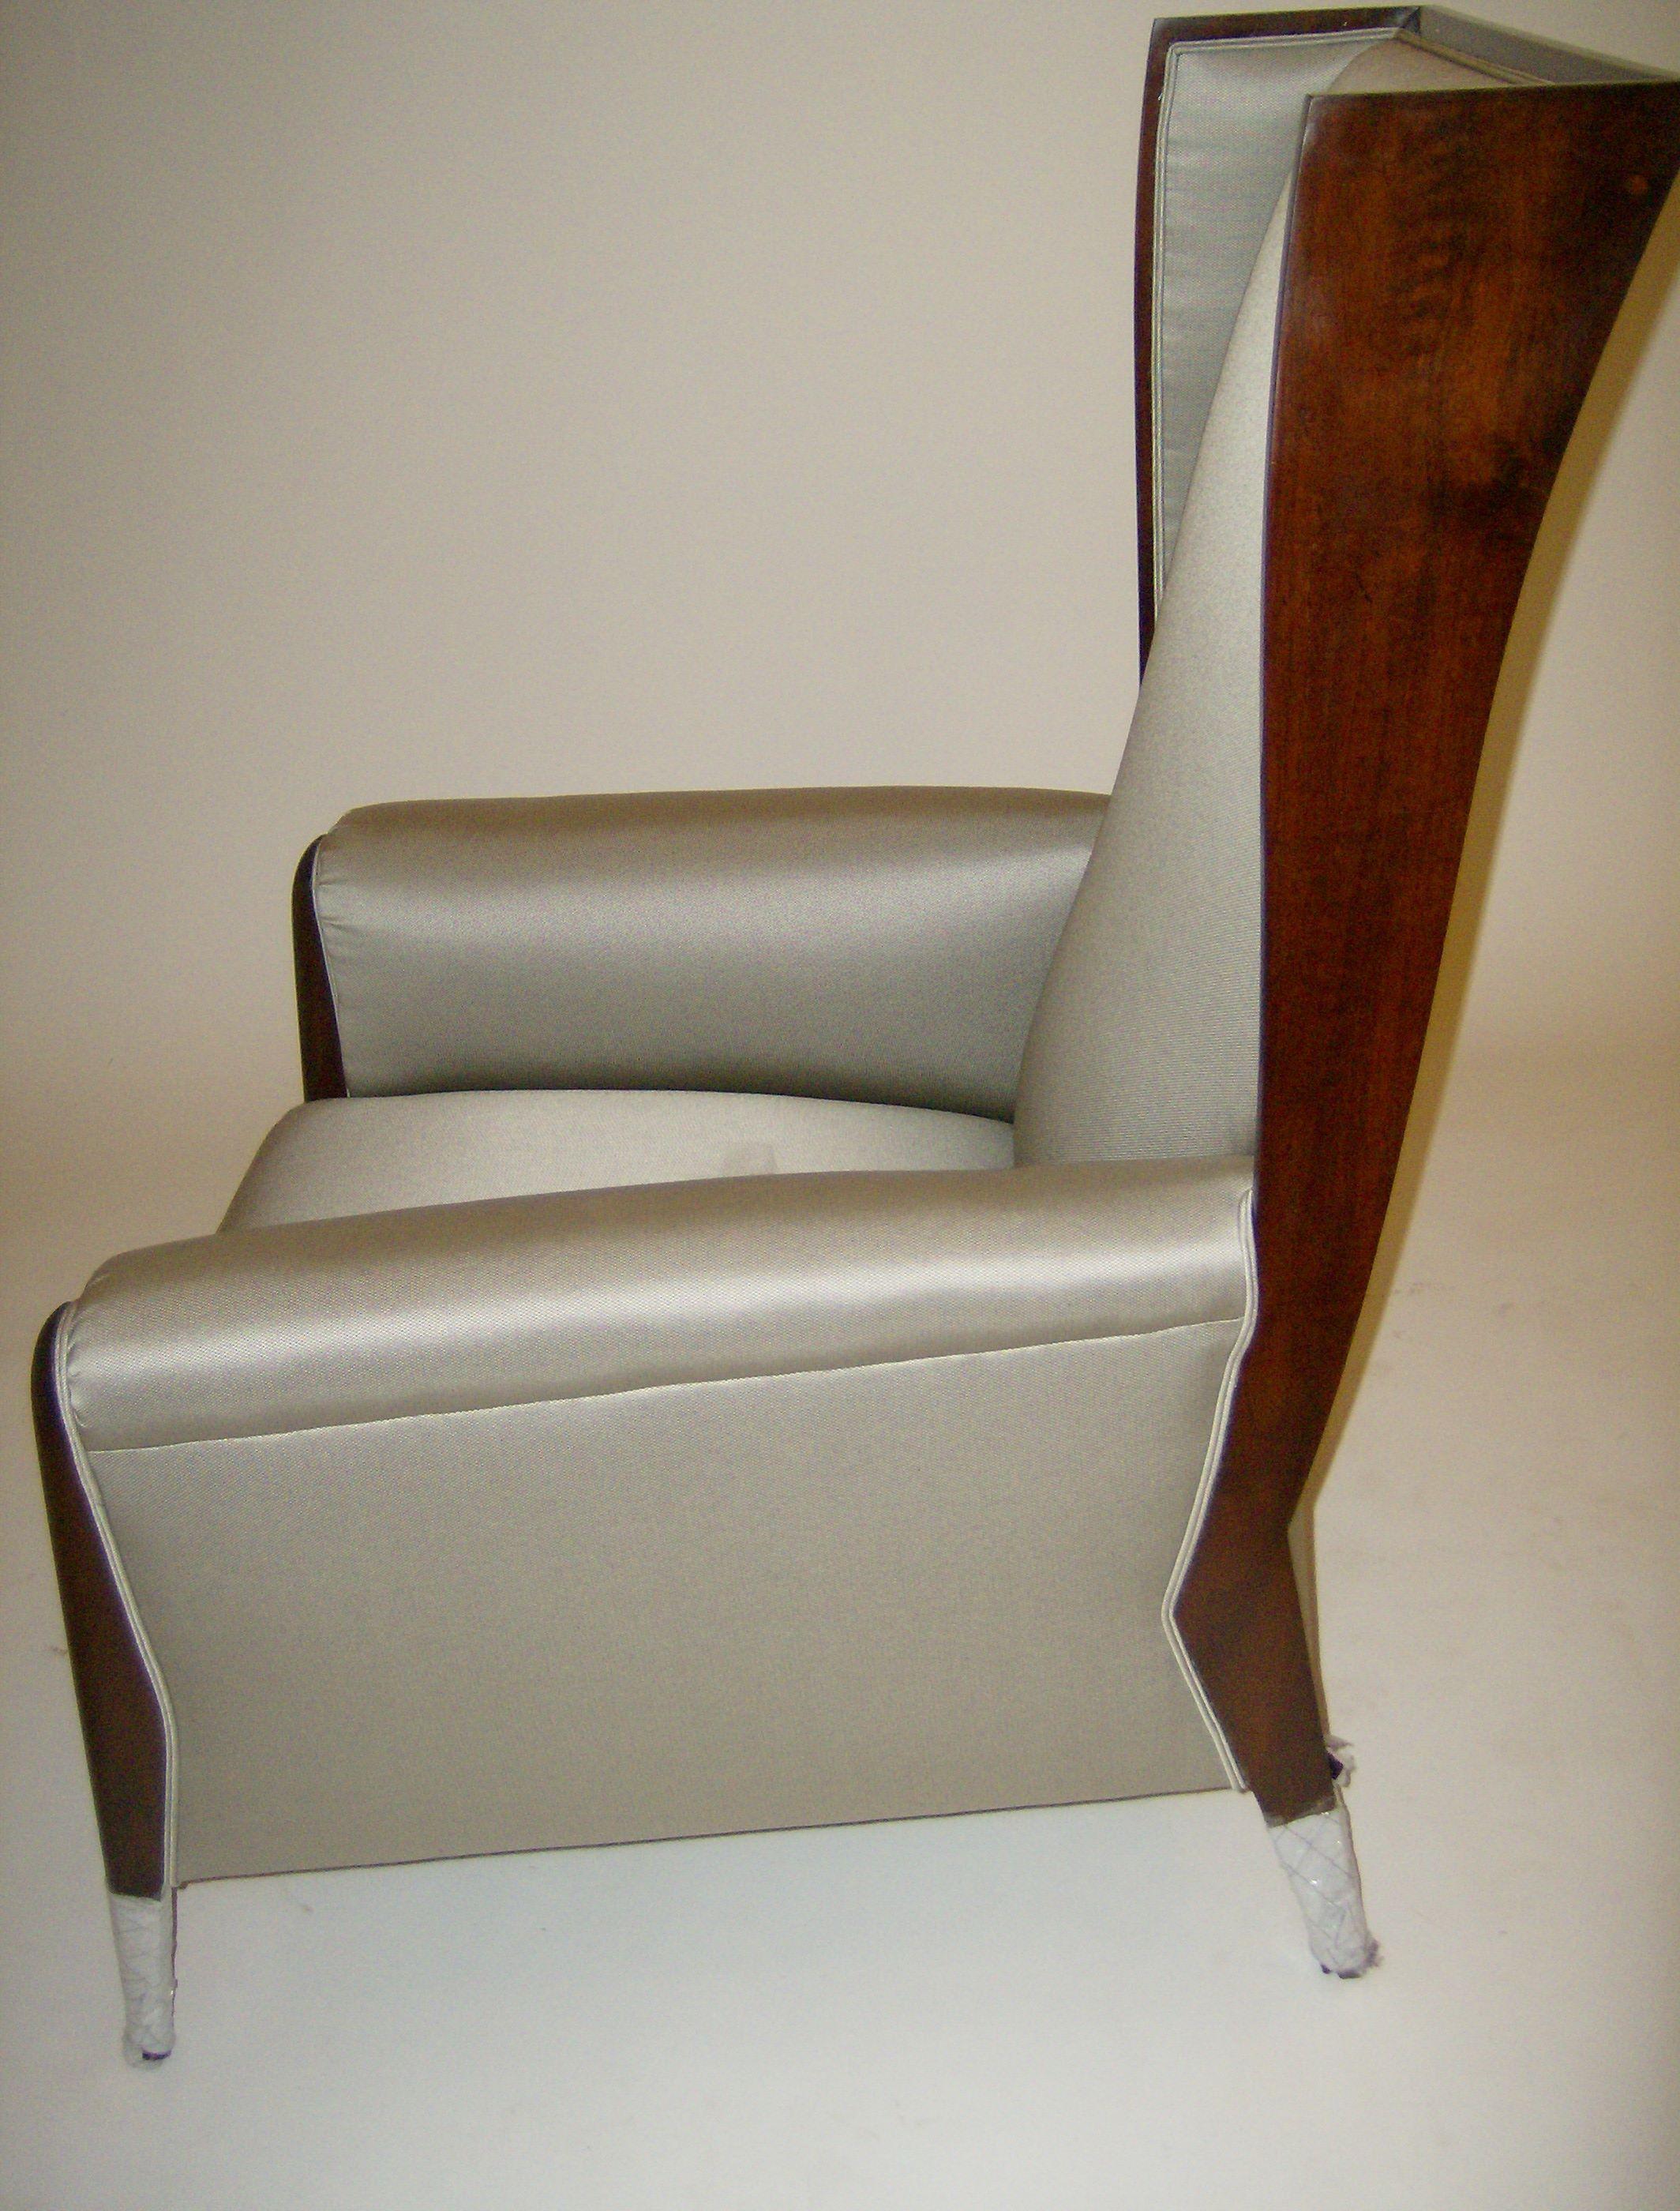 Upholstered Art Deco inspired wing chair in solid mahogany with custom upholstery option in your fabric COM/COL. Graceful design upholstered with tied springs and synthetic hoarse hair cushioning.